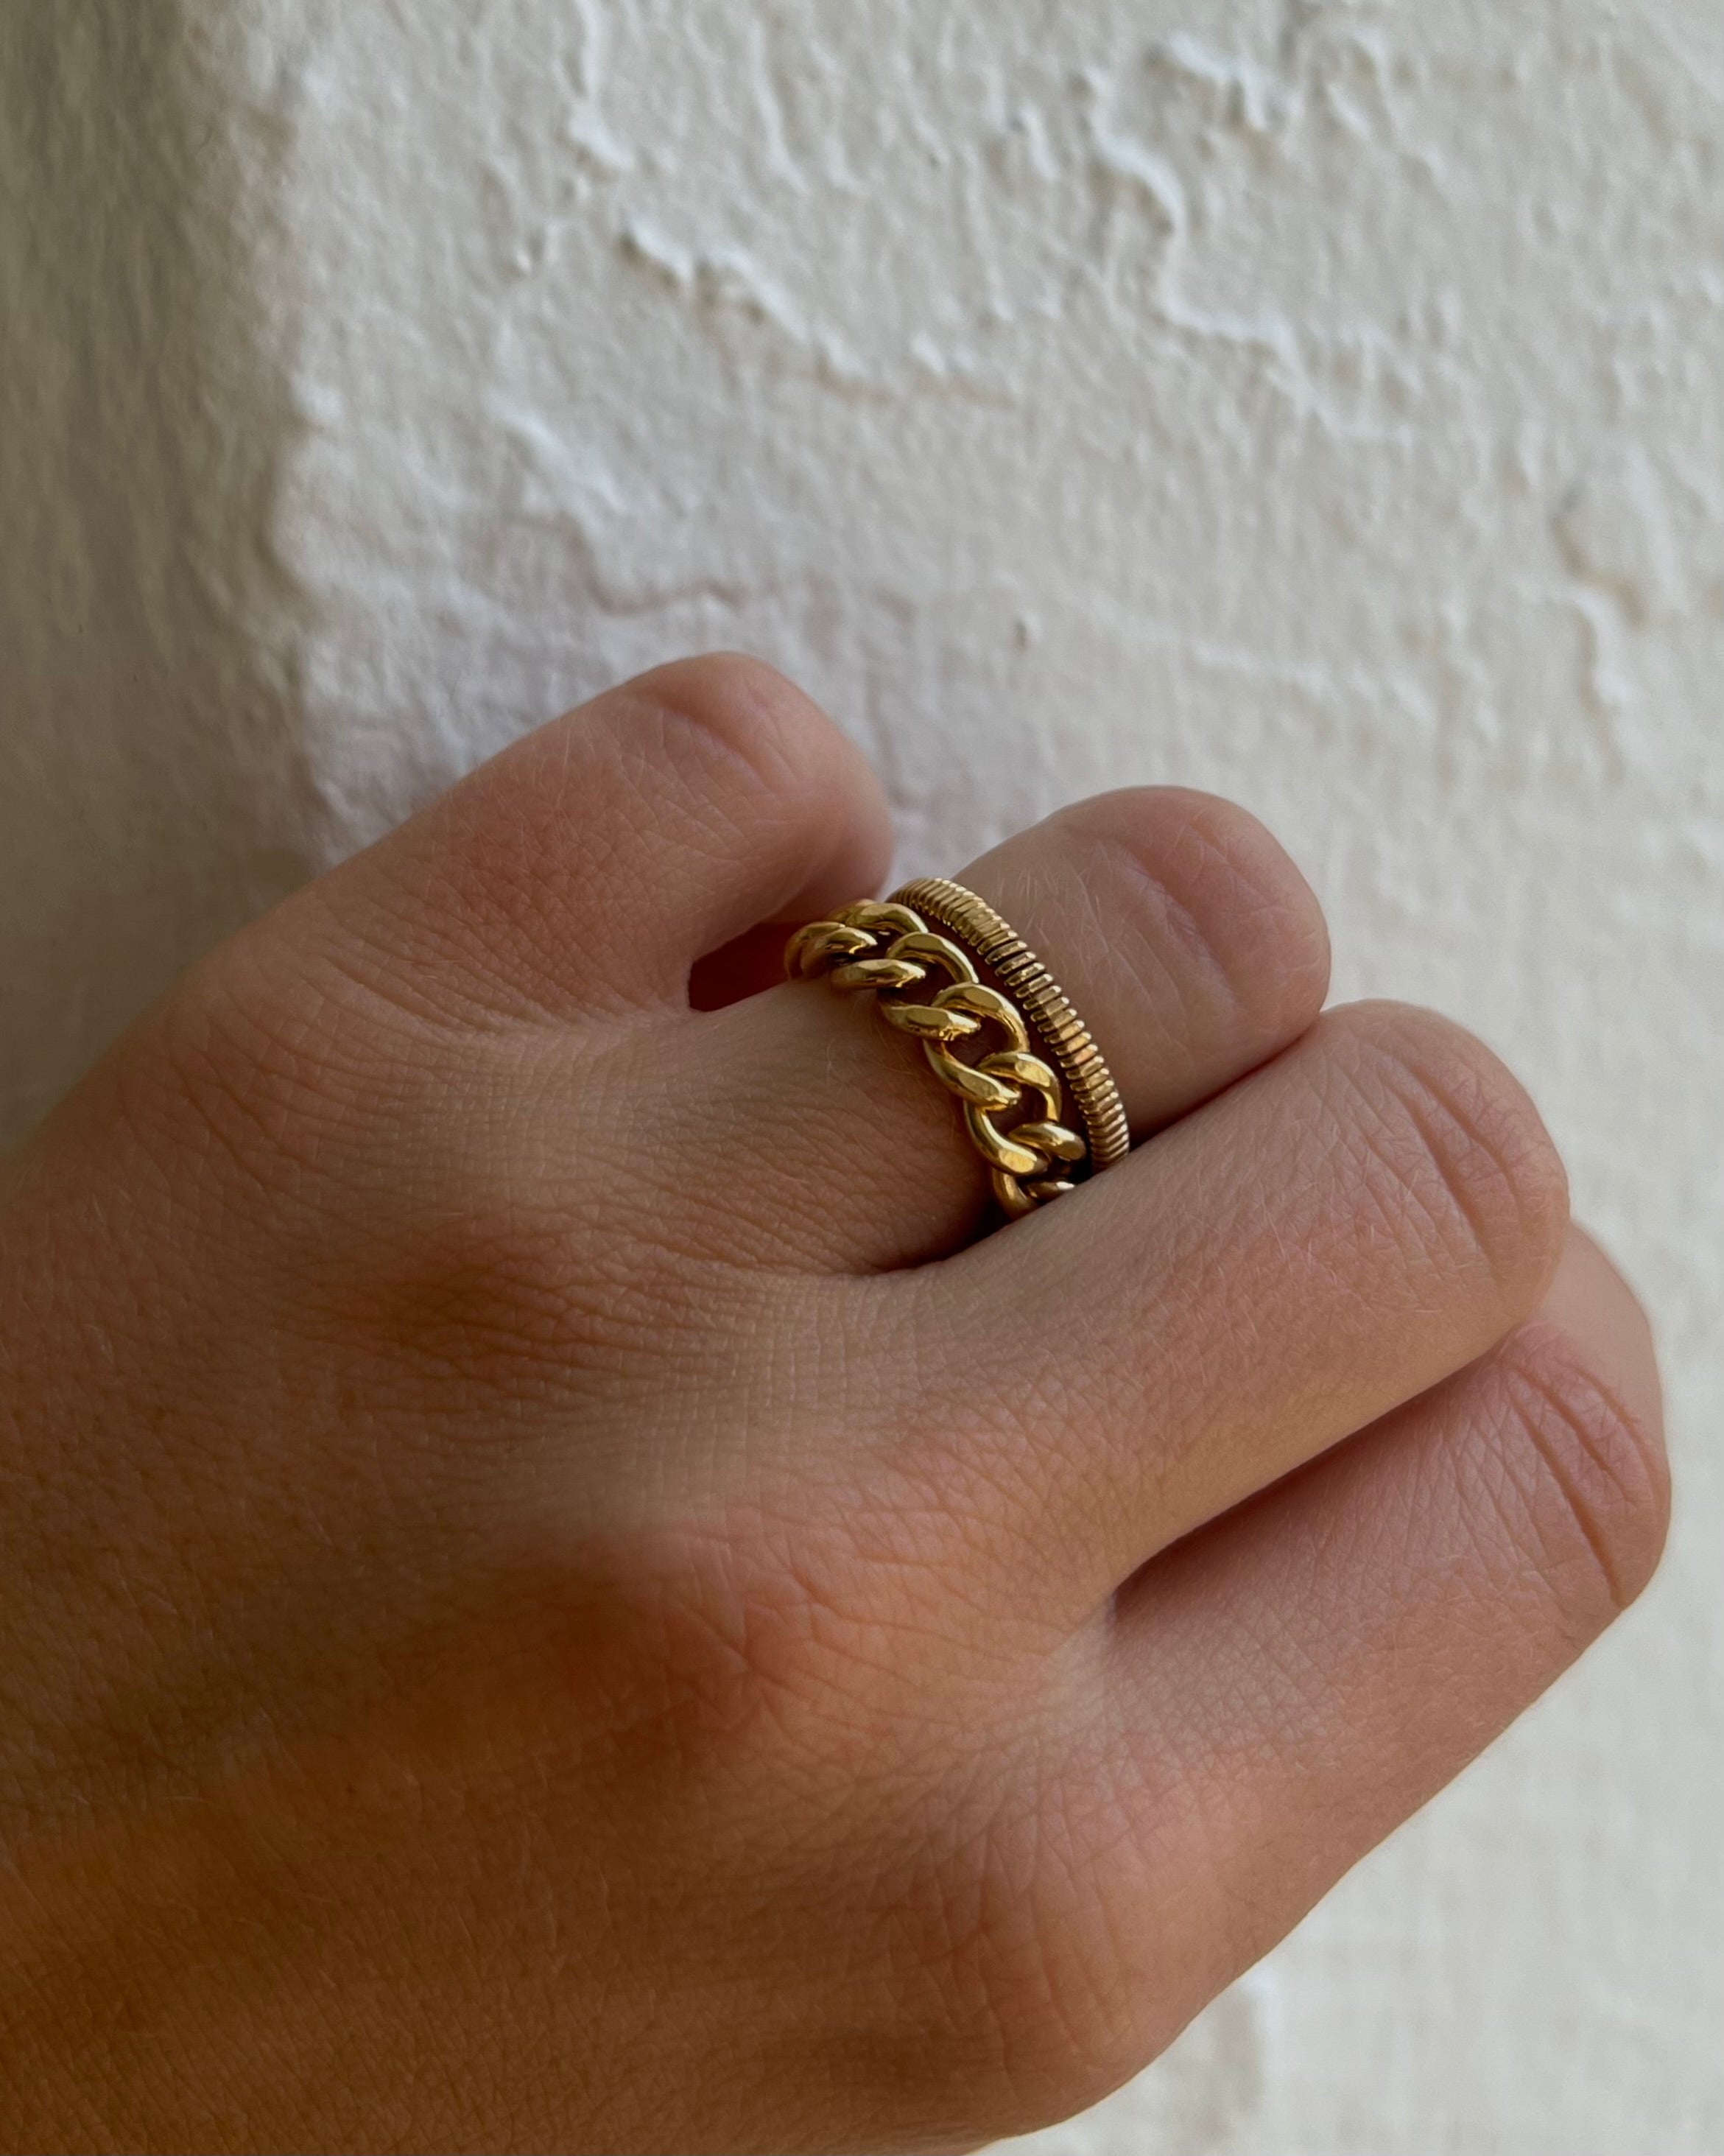 gold filled ring, dainty stacking ring, gold stacking ring, gold dainty ring, chunky gold ring, 14k gold filled ring, waterproof rings, water resistant jewelry, water resistant ring, dainty stacking ring, gold filled ring, gold filled jewelry. 14k gold filled jewelry